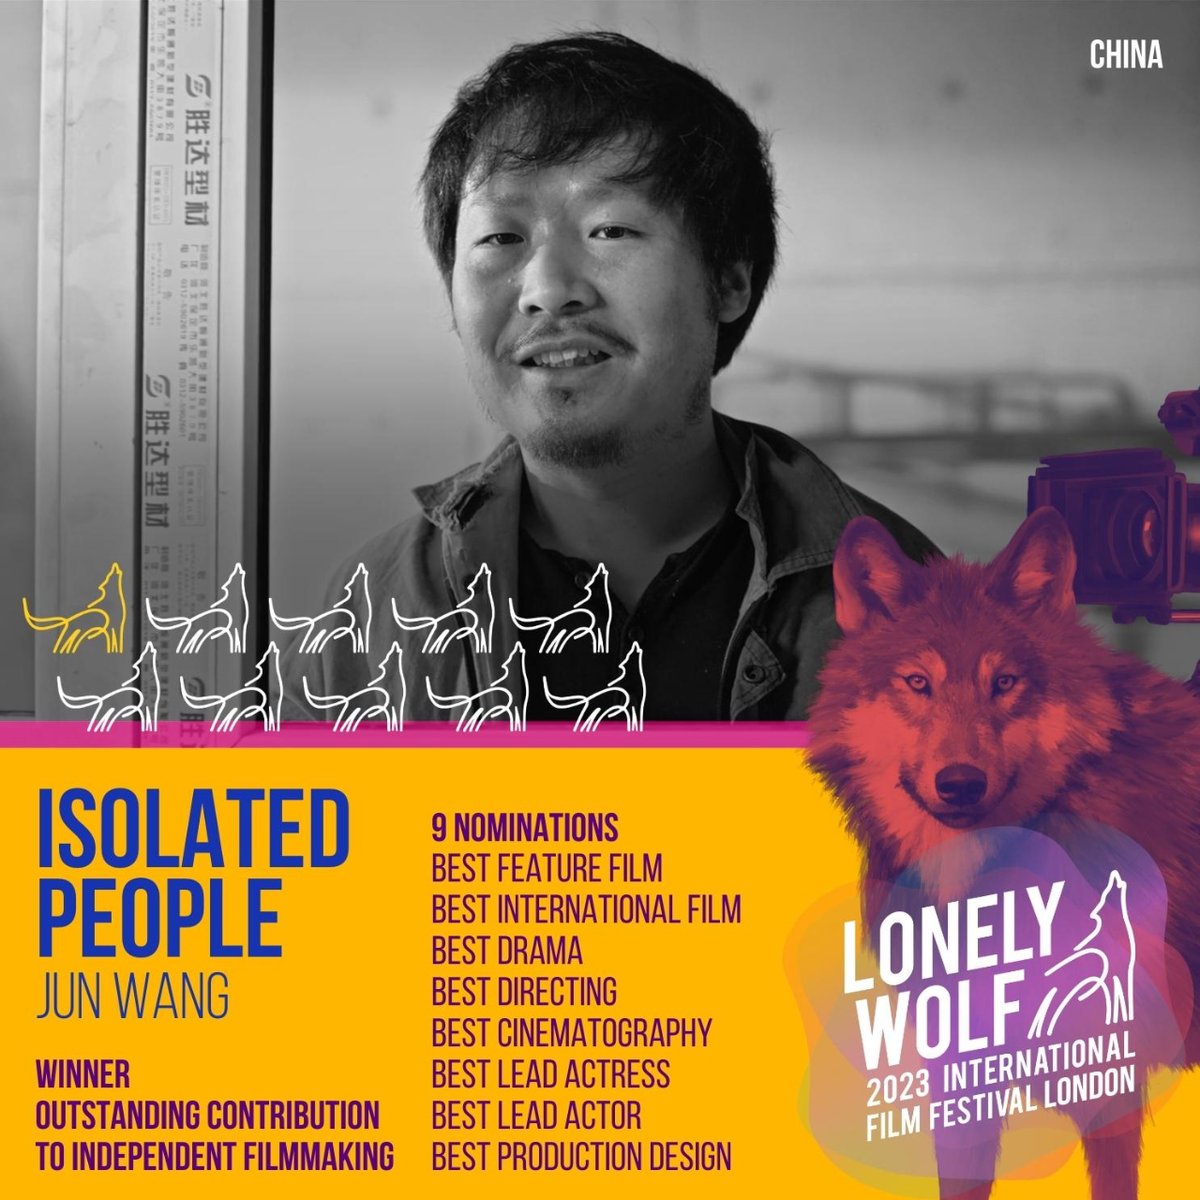 Congratulations @wangjun_director an Alpha in our wolfpack this 2023!  ISOLATED PEOPLE is spectacular! Winner for Outstanding Contribution to Independent Filmmaking + overall 9 nominations!! Oo-oo-owooooo!!